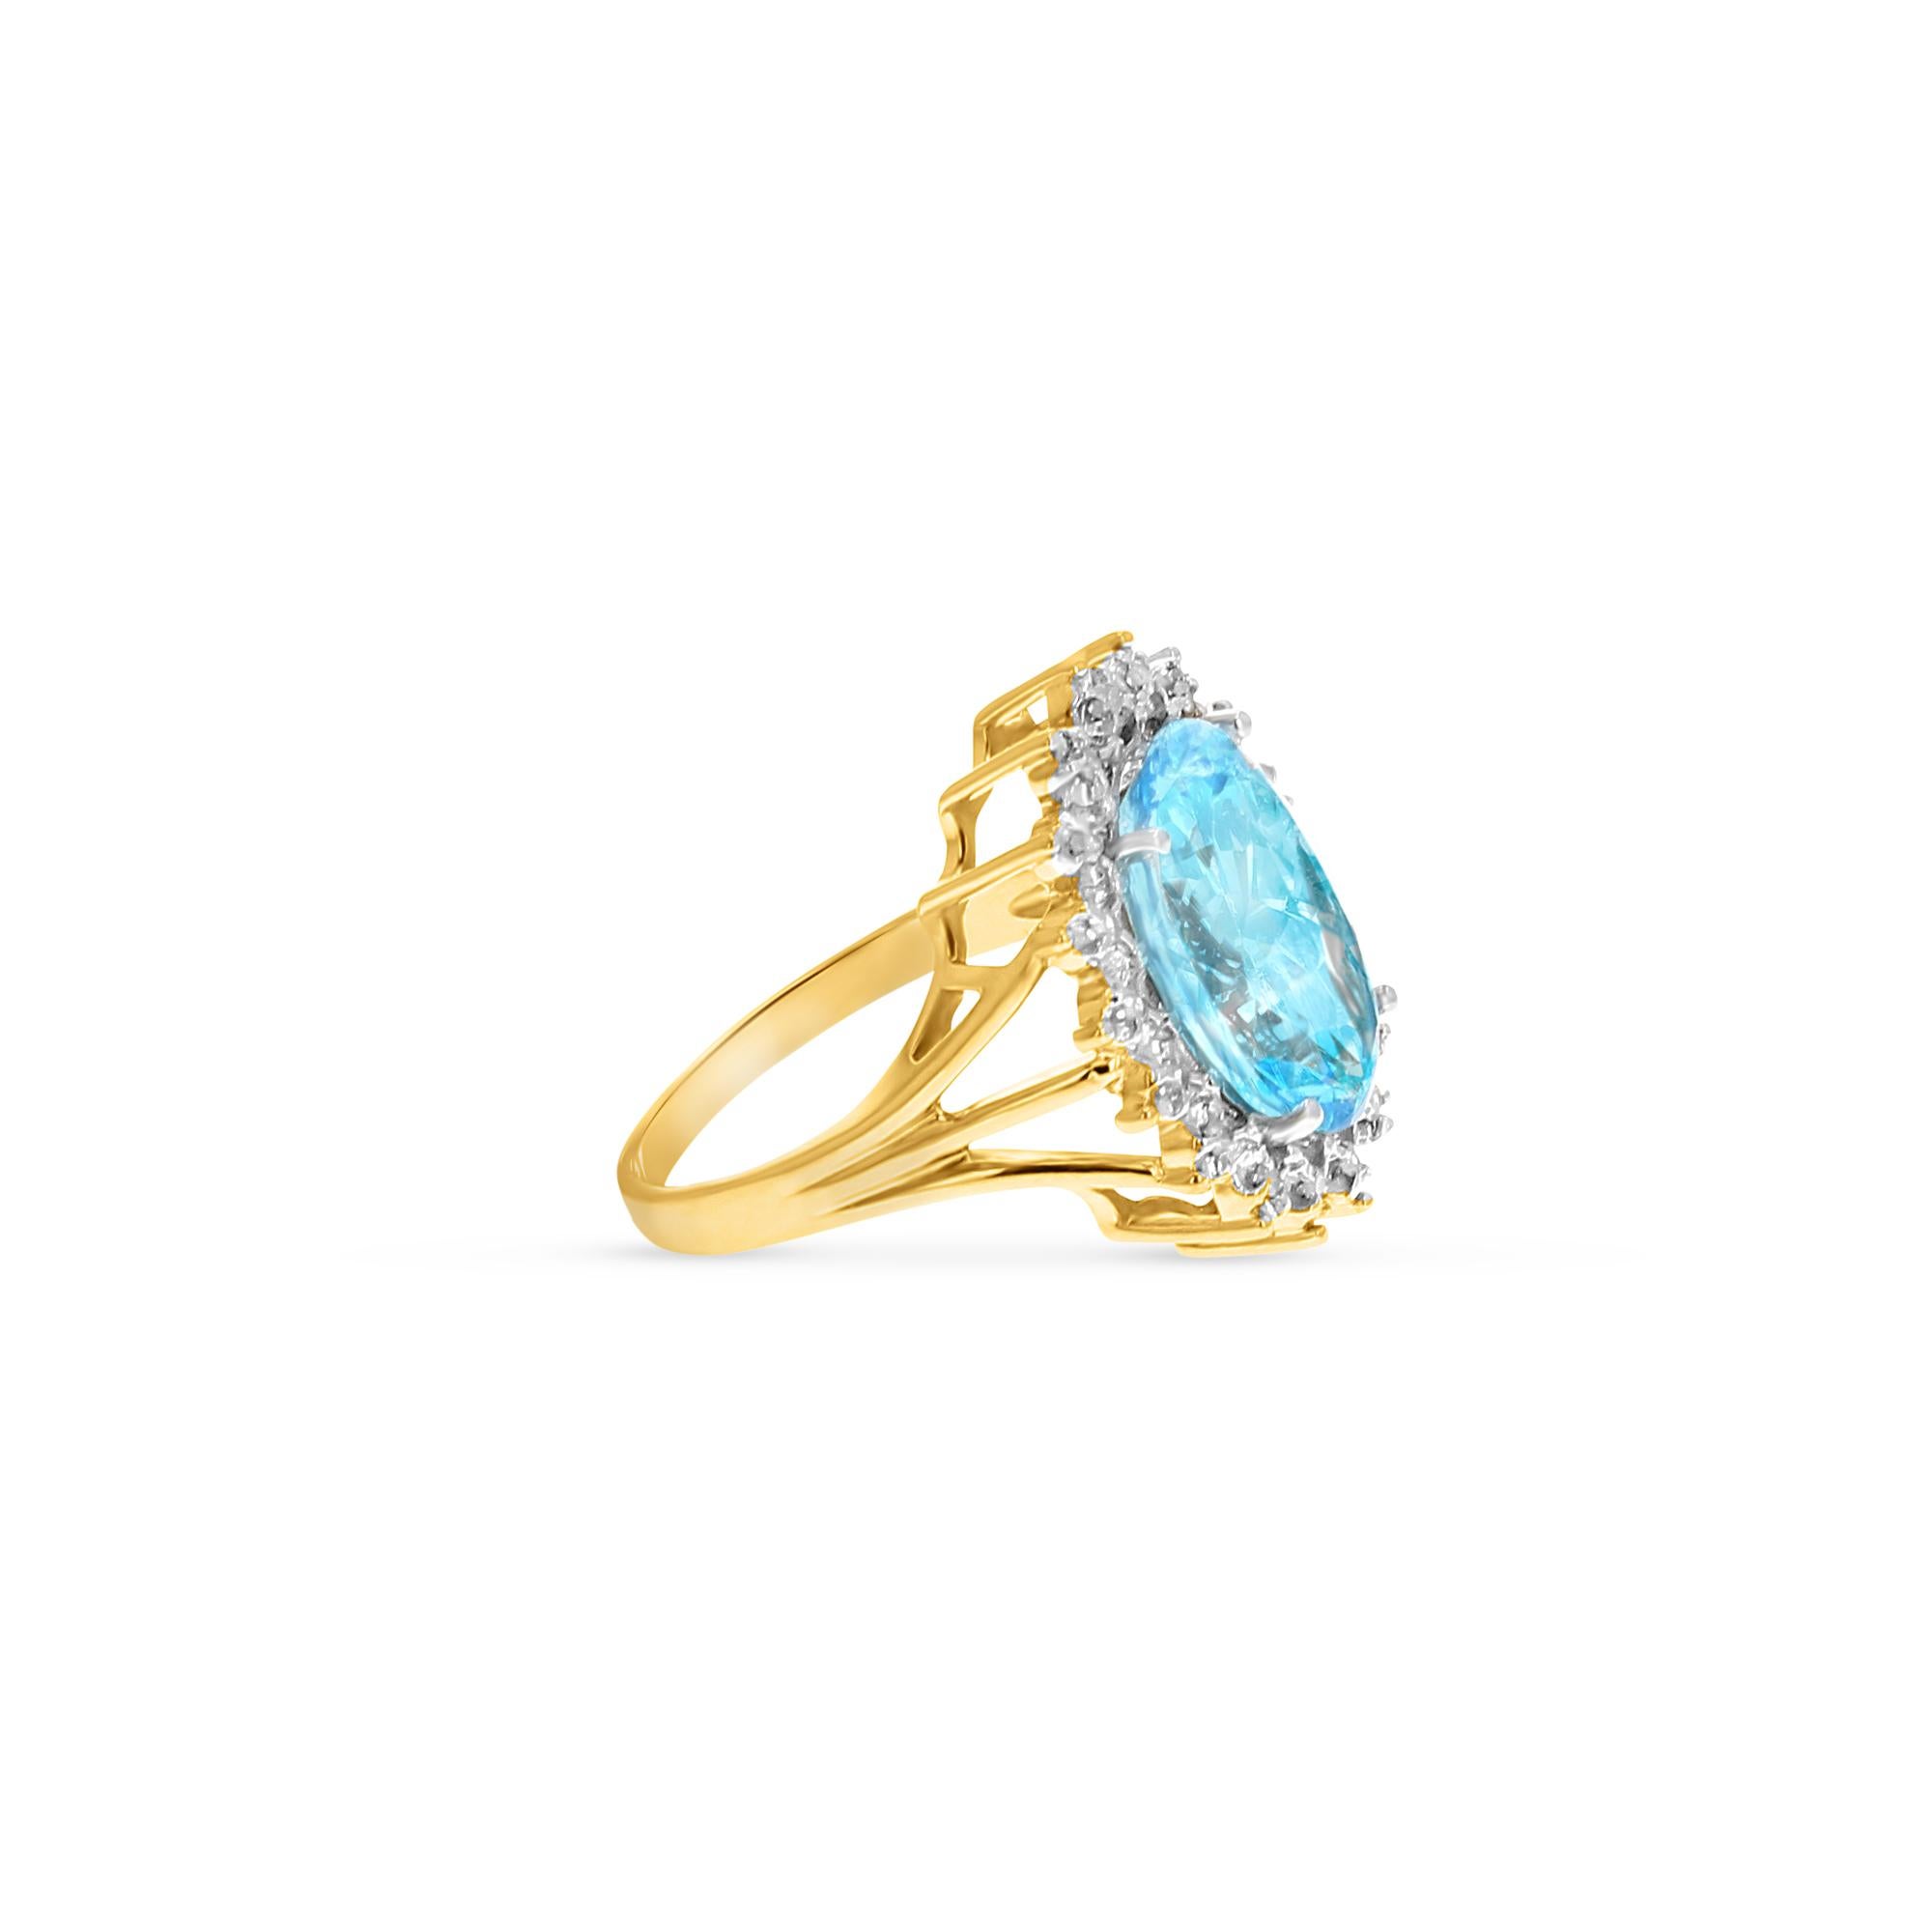 ♥ Product Summary ♥

Main Stone: Blue Topaz & Diamonds
Approx. Total Carat Weight: 10.14cttw
Topaz Carat Weight: 10.00ct
Diamond Carat Weight: .14ct
Dimensions: 20mm (height)
Band Material: 14k Yellow Gold